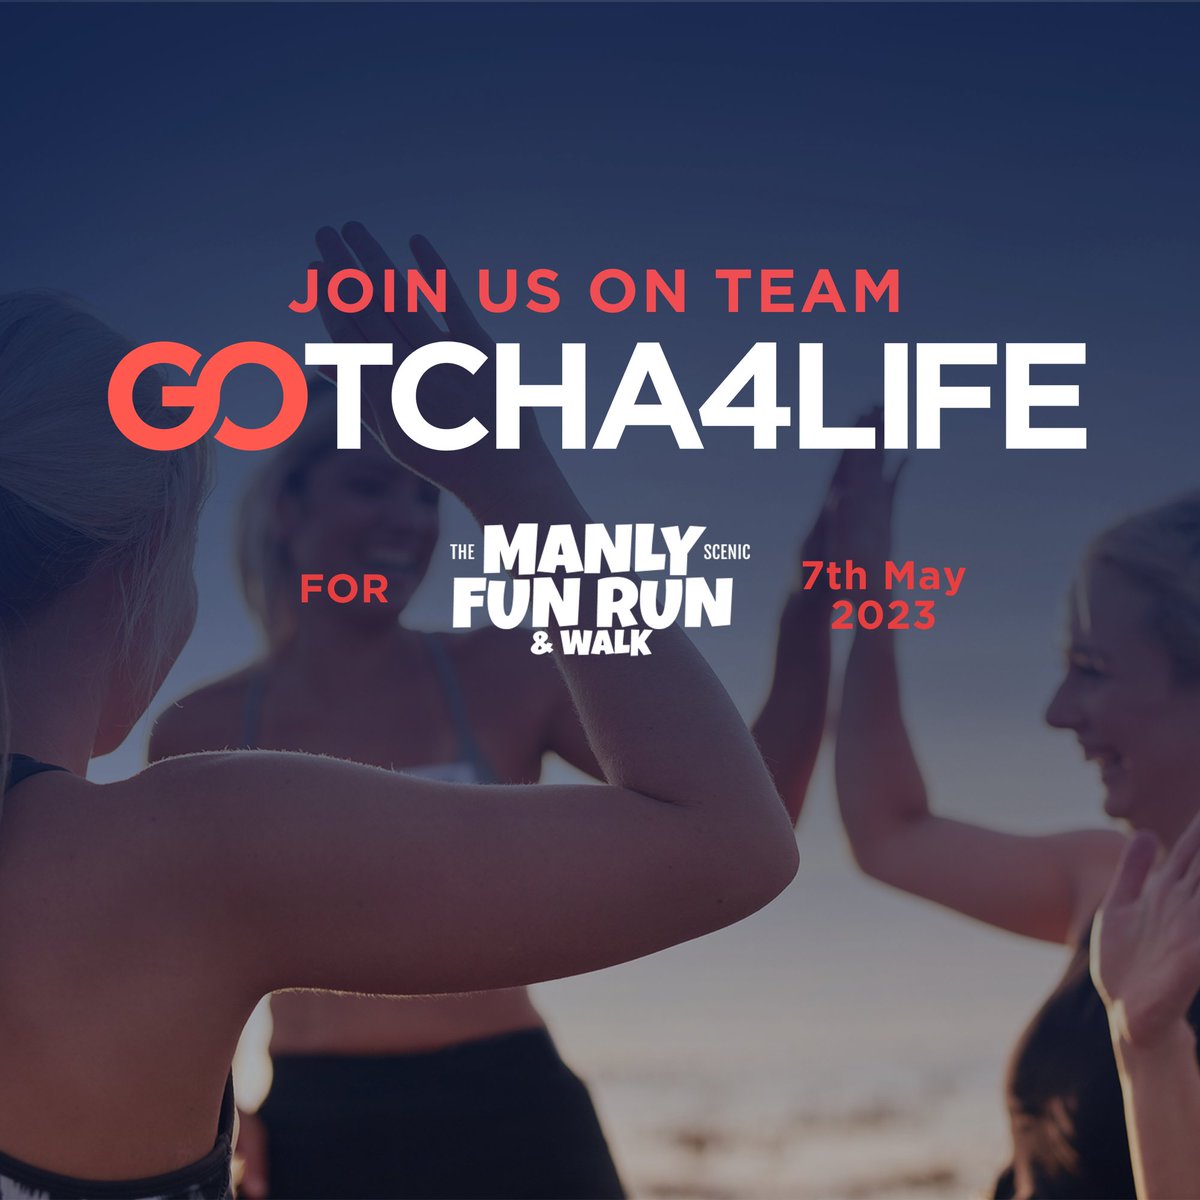 Call out to our Northern Beaches NSW friends and family! 💛 Join Team Gotcha4Life on May 7 for the Manly Fun Run & Walk with Gus Worland and Kath Koschel. 🏃‍♀️🏃🚶‍♂️🚶 Show your support for mental fitness and help us to raise $25,000 😍 Sign up here 👋👇 manlyfunrun2023.grassrootz.com/gotcha4life